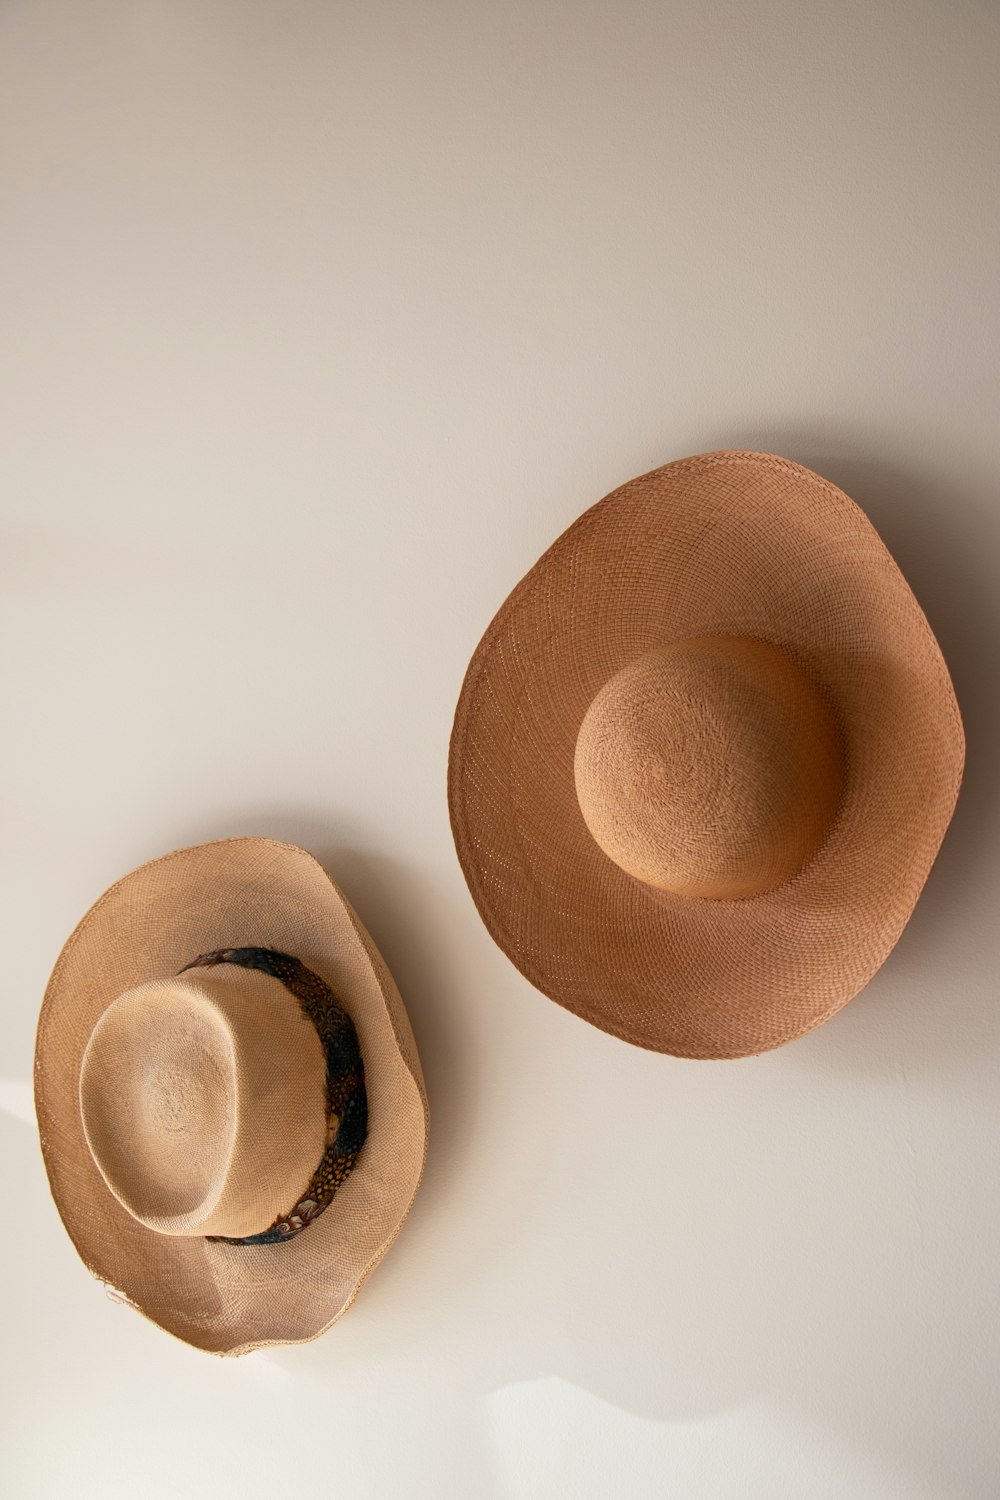 brown hat on white surface